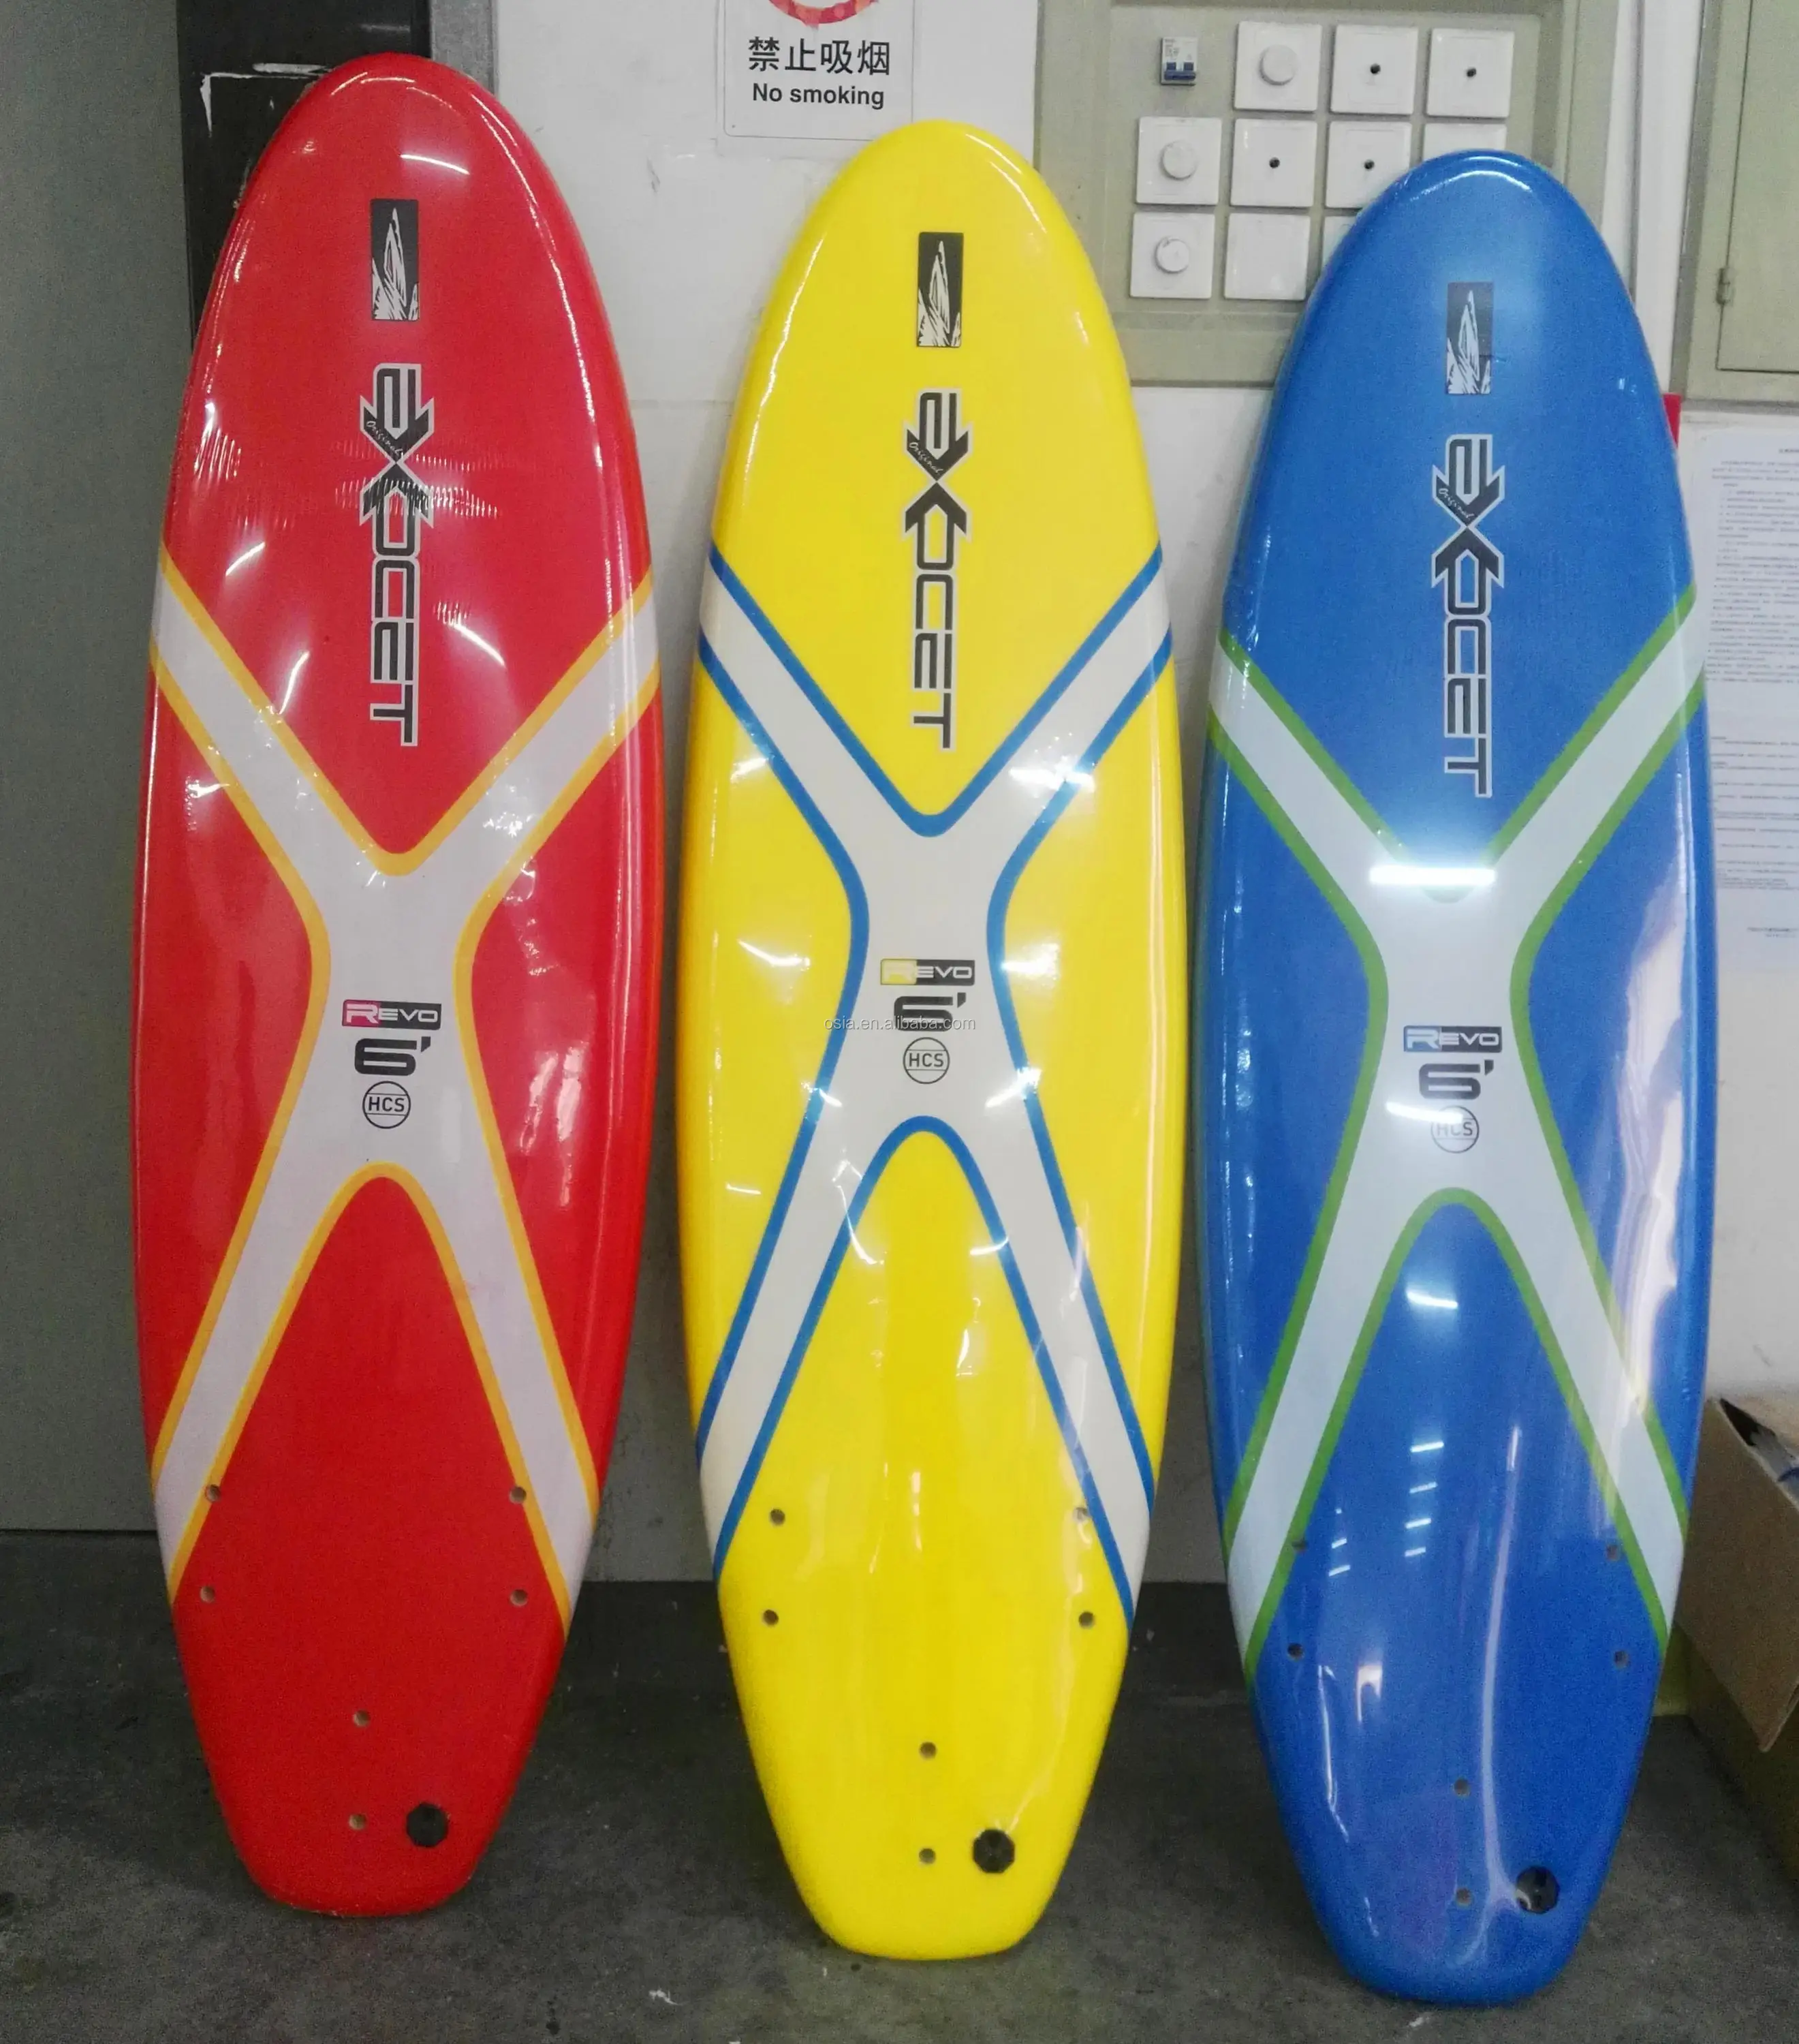 6ft Soft Top Surfboard With Fins And Leash - Buy Soft Top Surfboard,Top Soft Surfing Board,Top 